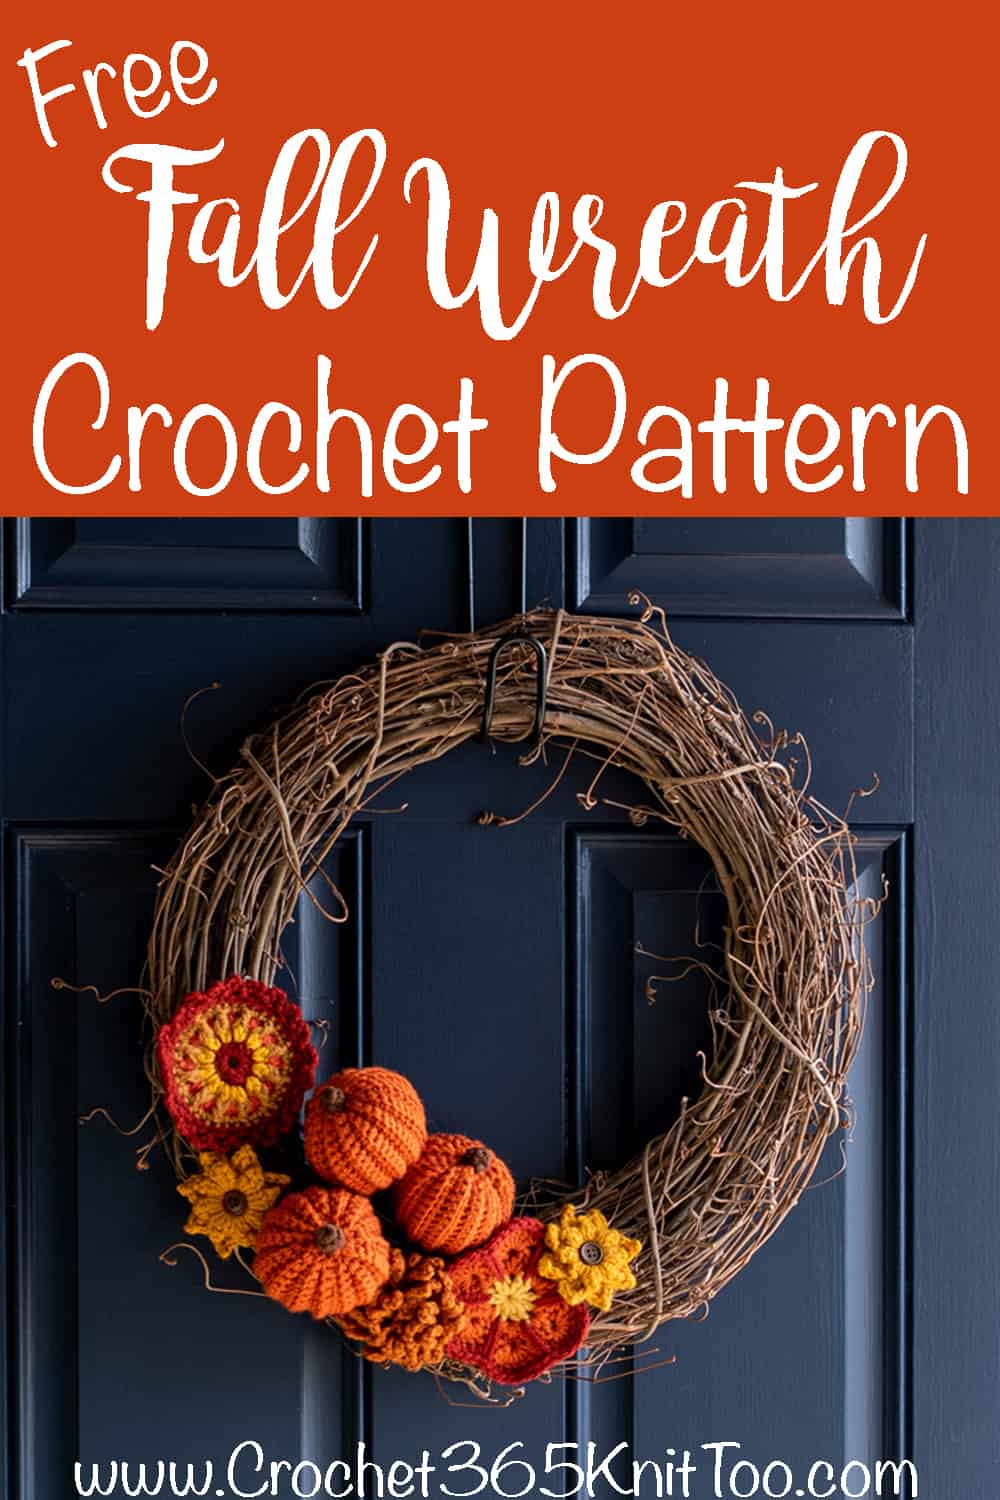 Grapevine wreath with crochet pumpkins and flowers on a blue door